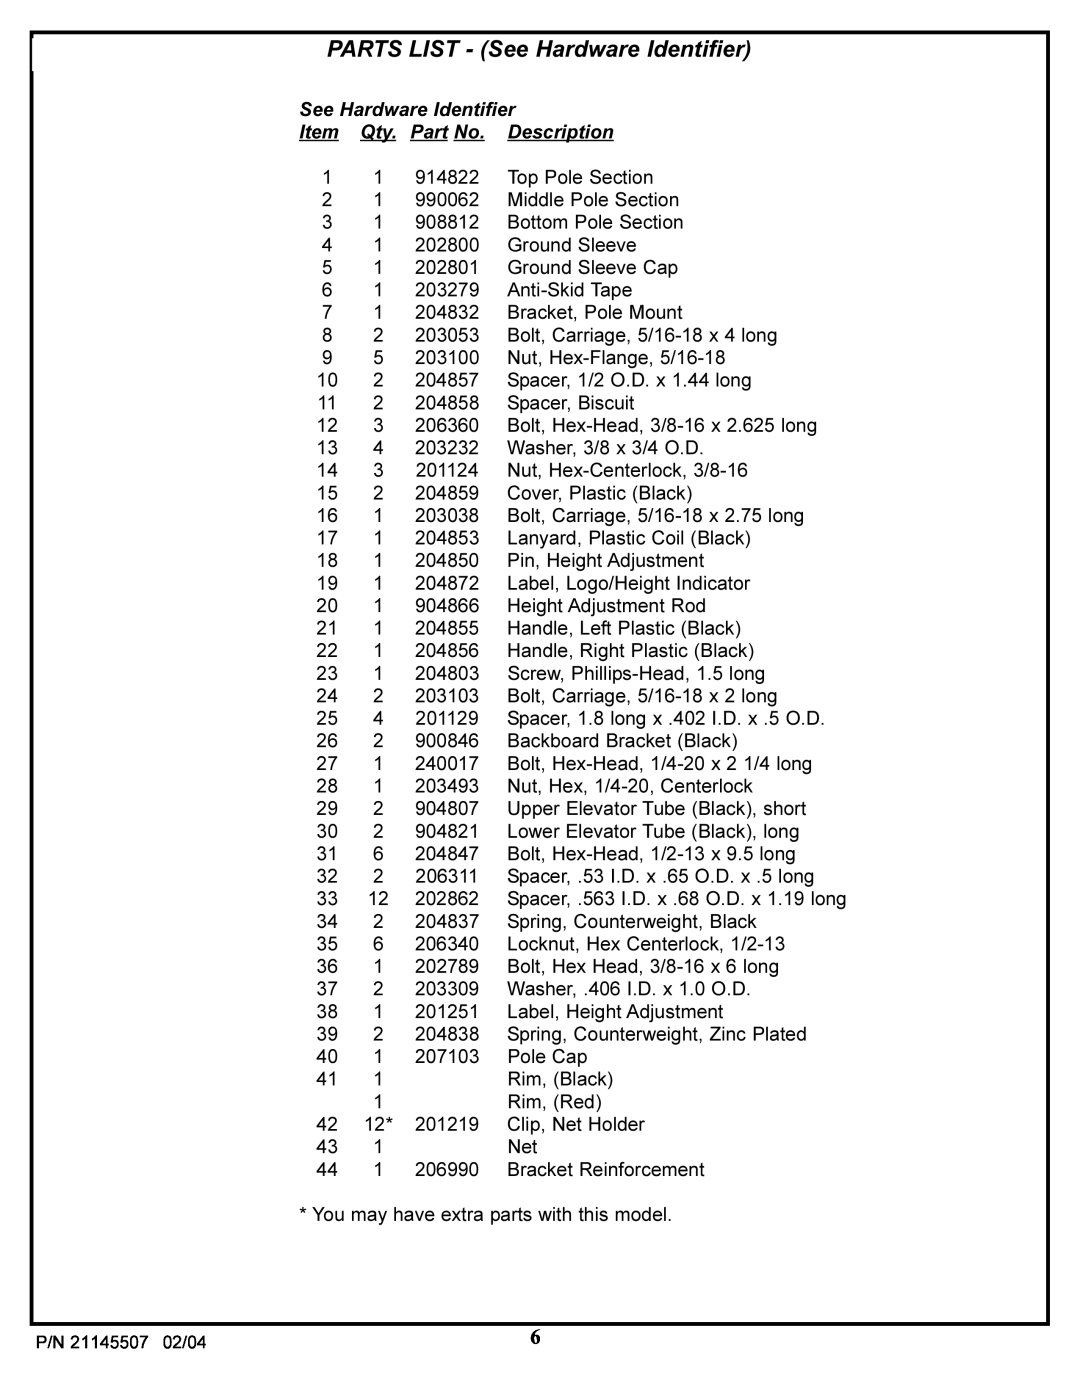 Huffy Sports Basketball Systems manual PARTS LIST - See Hardware Identifier 